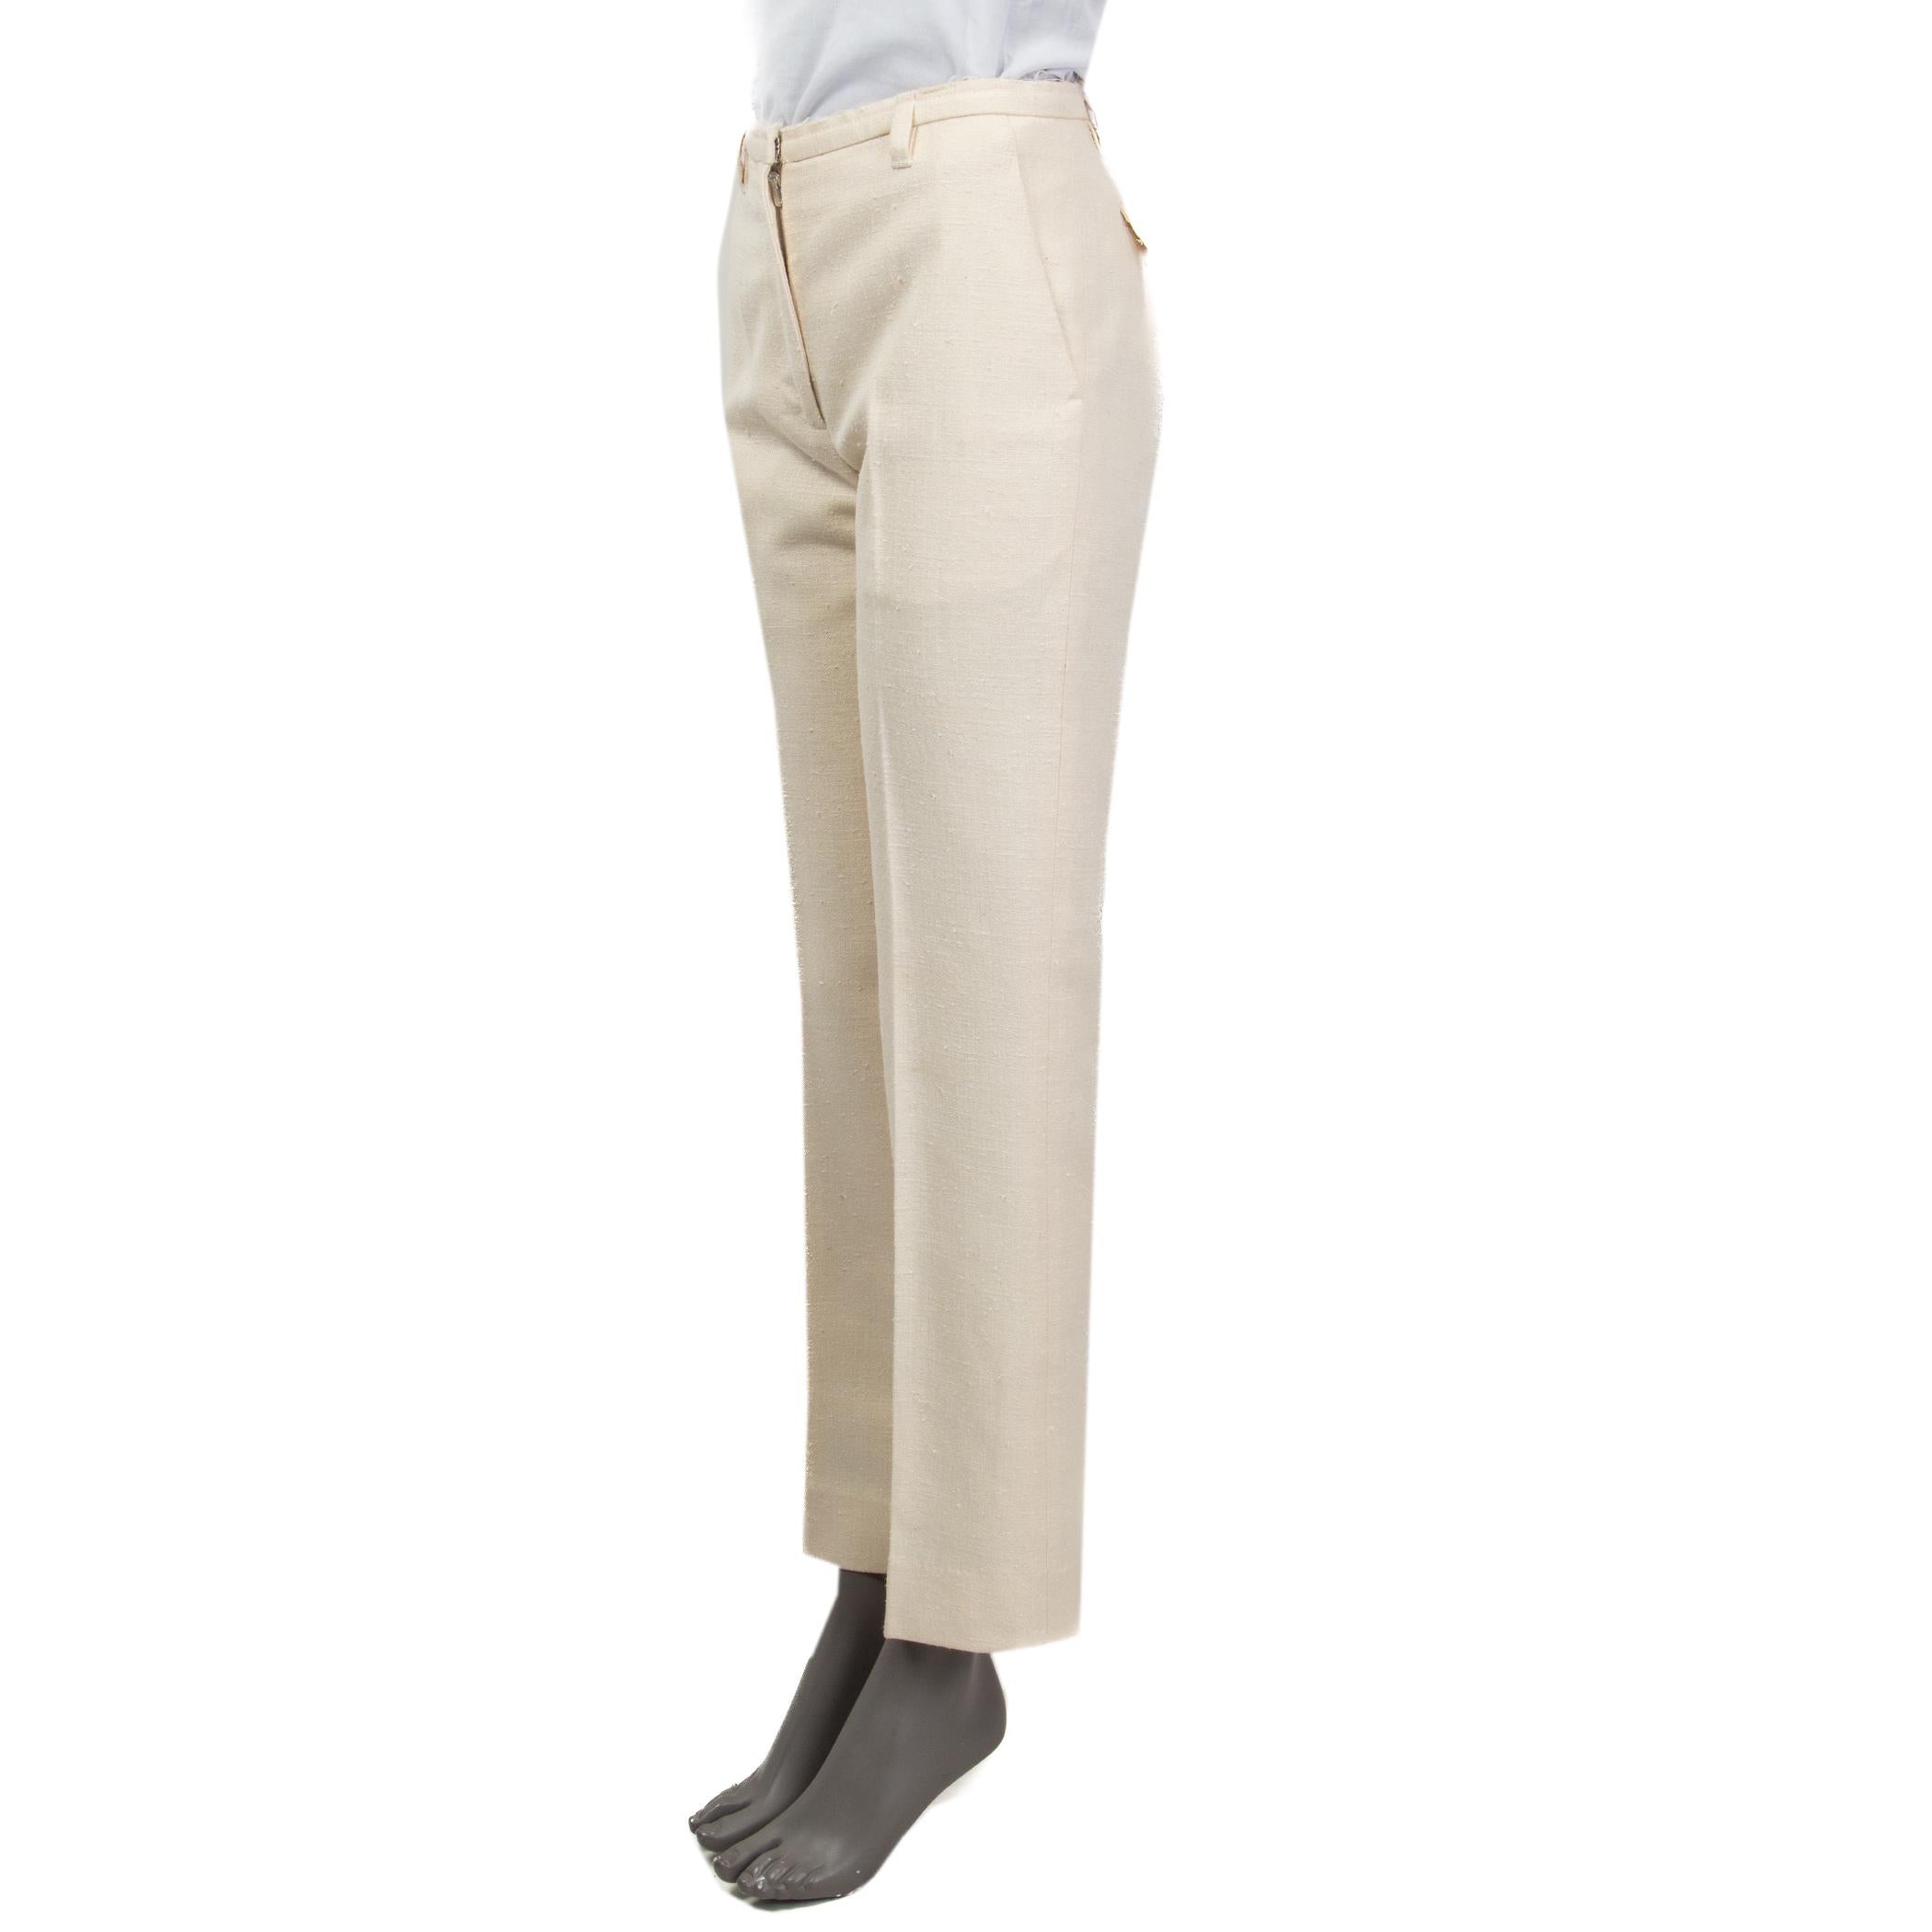 100% authentic Marc Jacobs suit pants in ivory raw silk (100%). Feature a frayed waistband and belt loops. Have two slit pockets on the front, one faux buttoned pocket and a sewn shut slit pocket at the back. Open with a concealed hook and a zipper